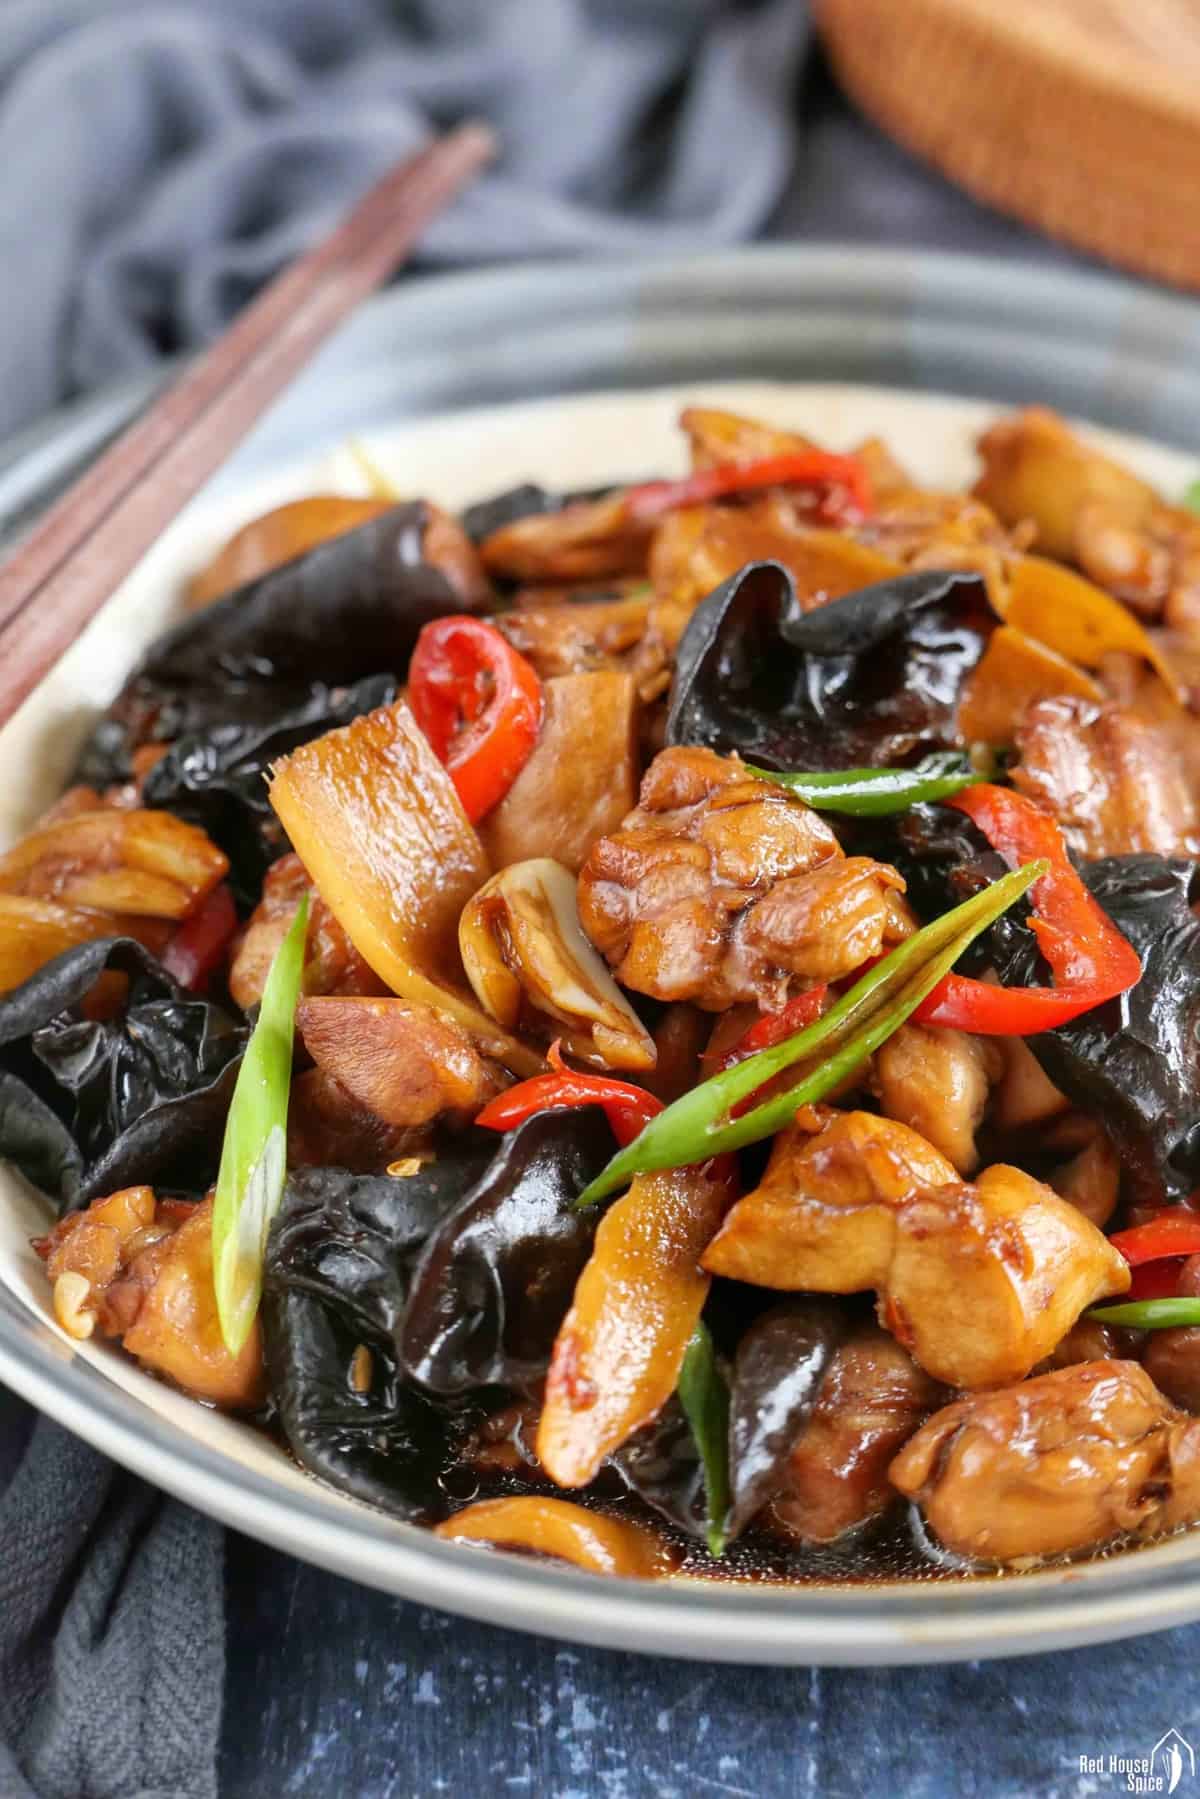 braised chicken pieces with sliced ginger and wood ear mushrooms